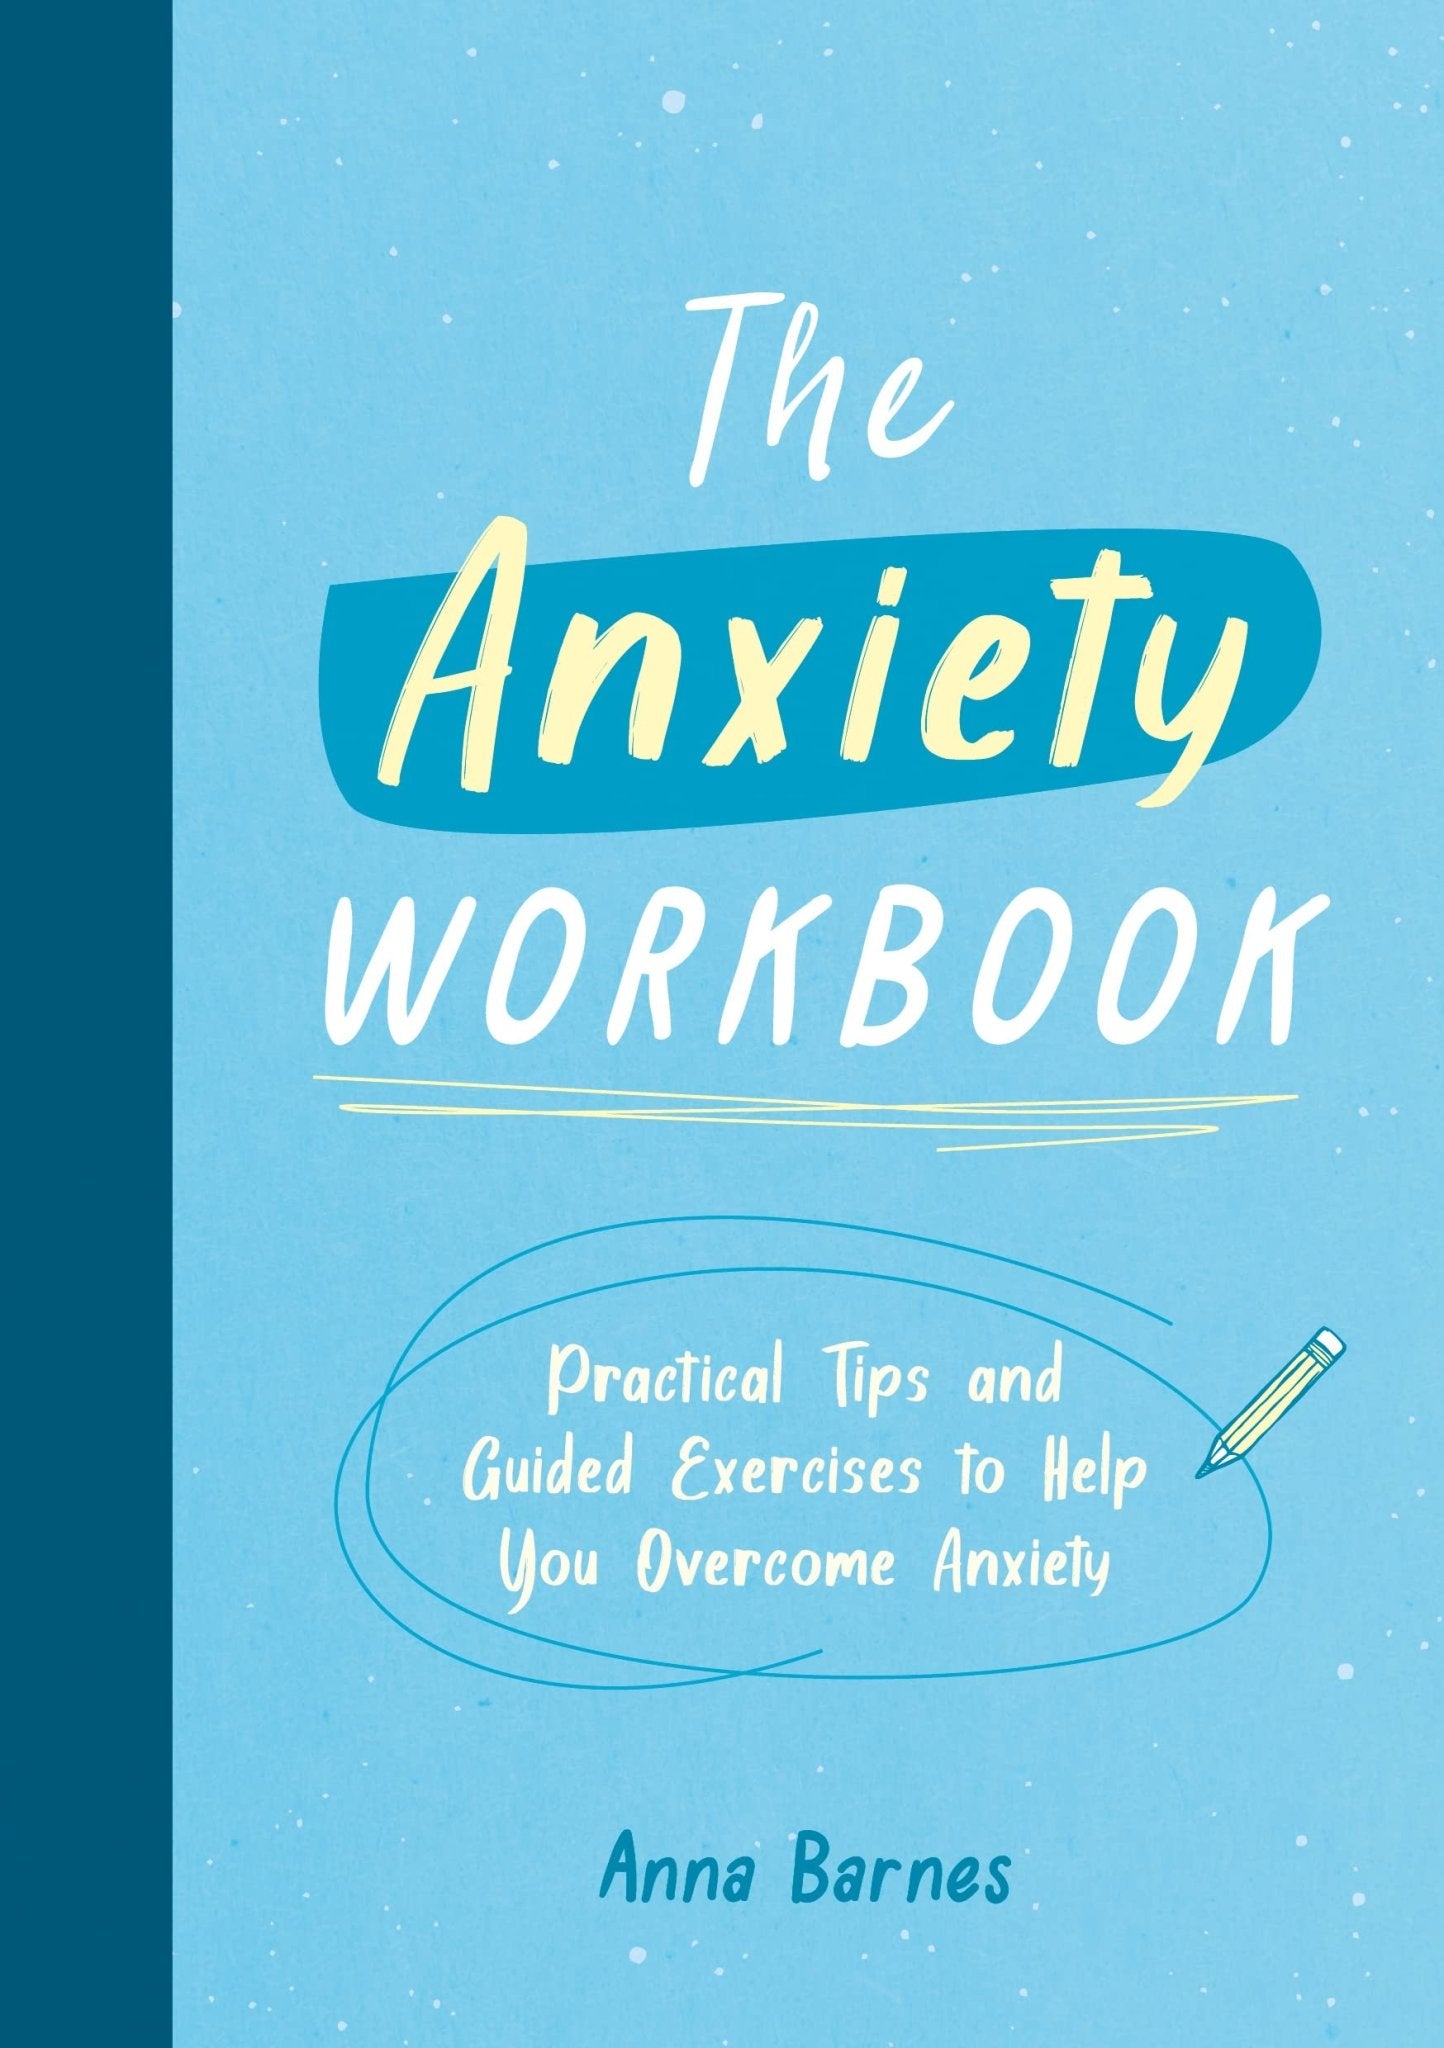 The Anxiety Workbook: Practical Tips and Guided Exercises to Help You  Overcome Anxiety (Book by Anna Barnes) - Spiffy - The Happiness Shop